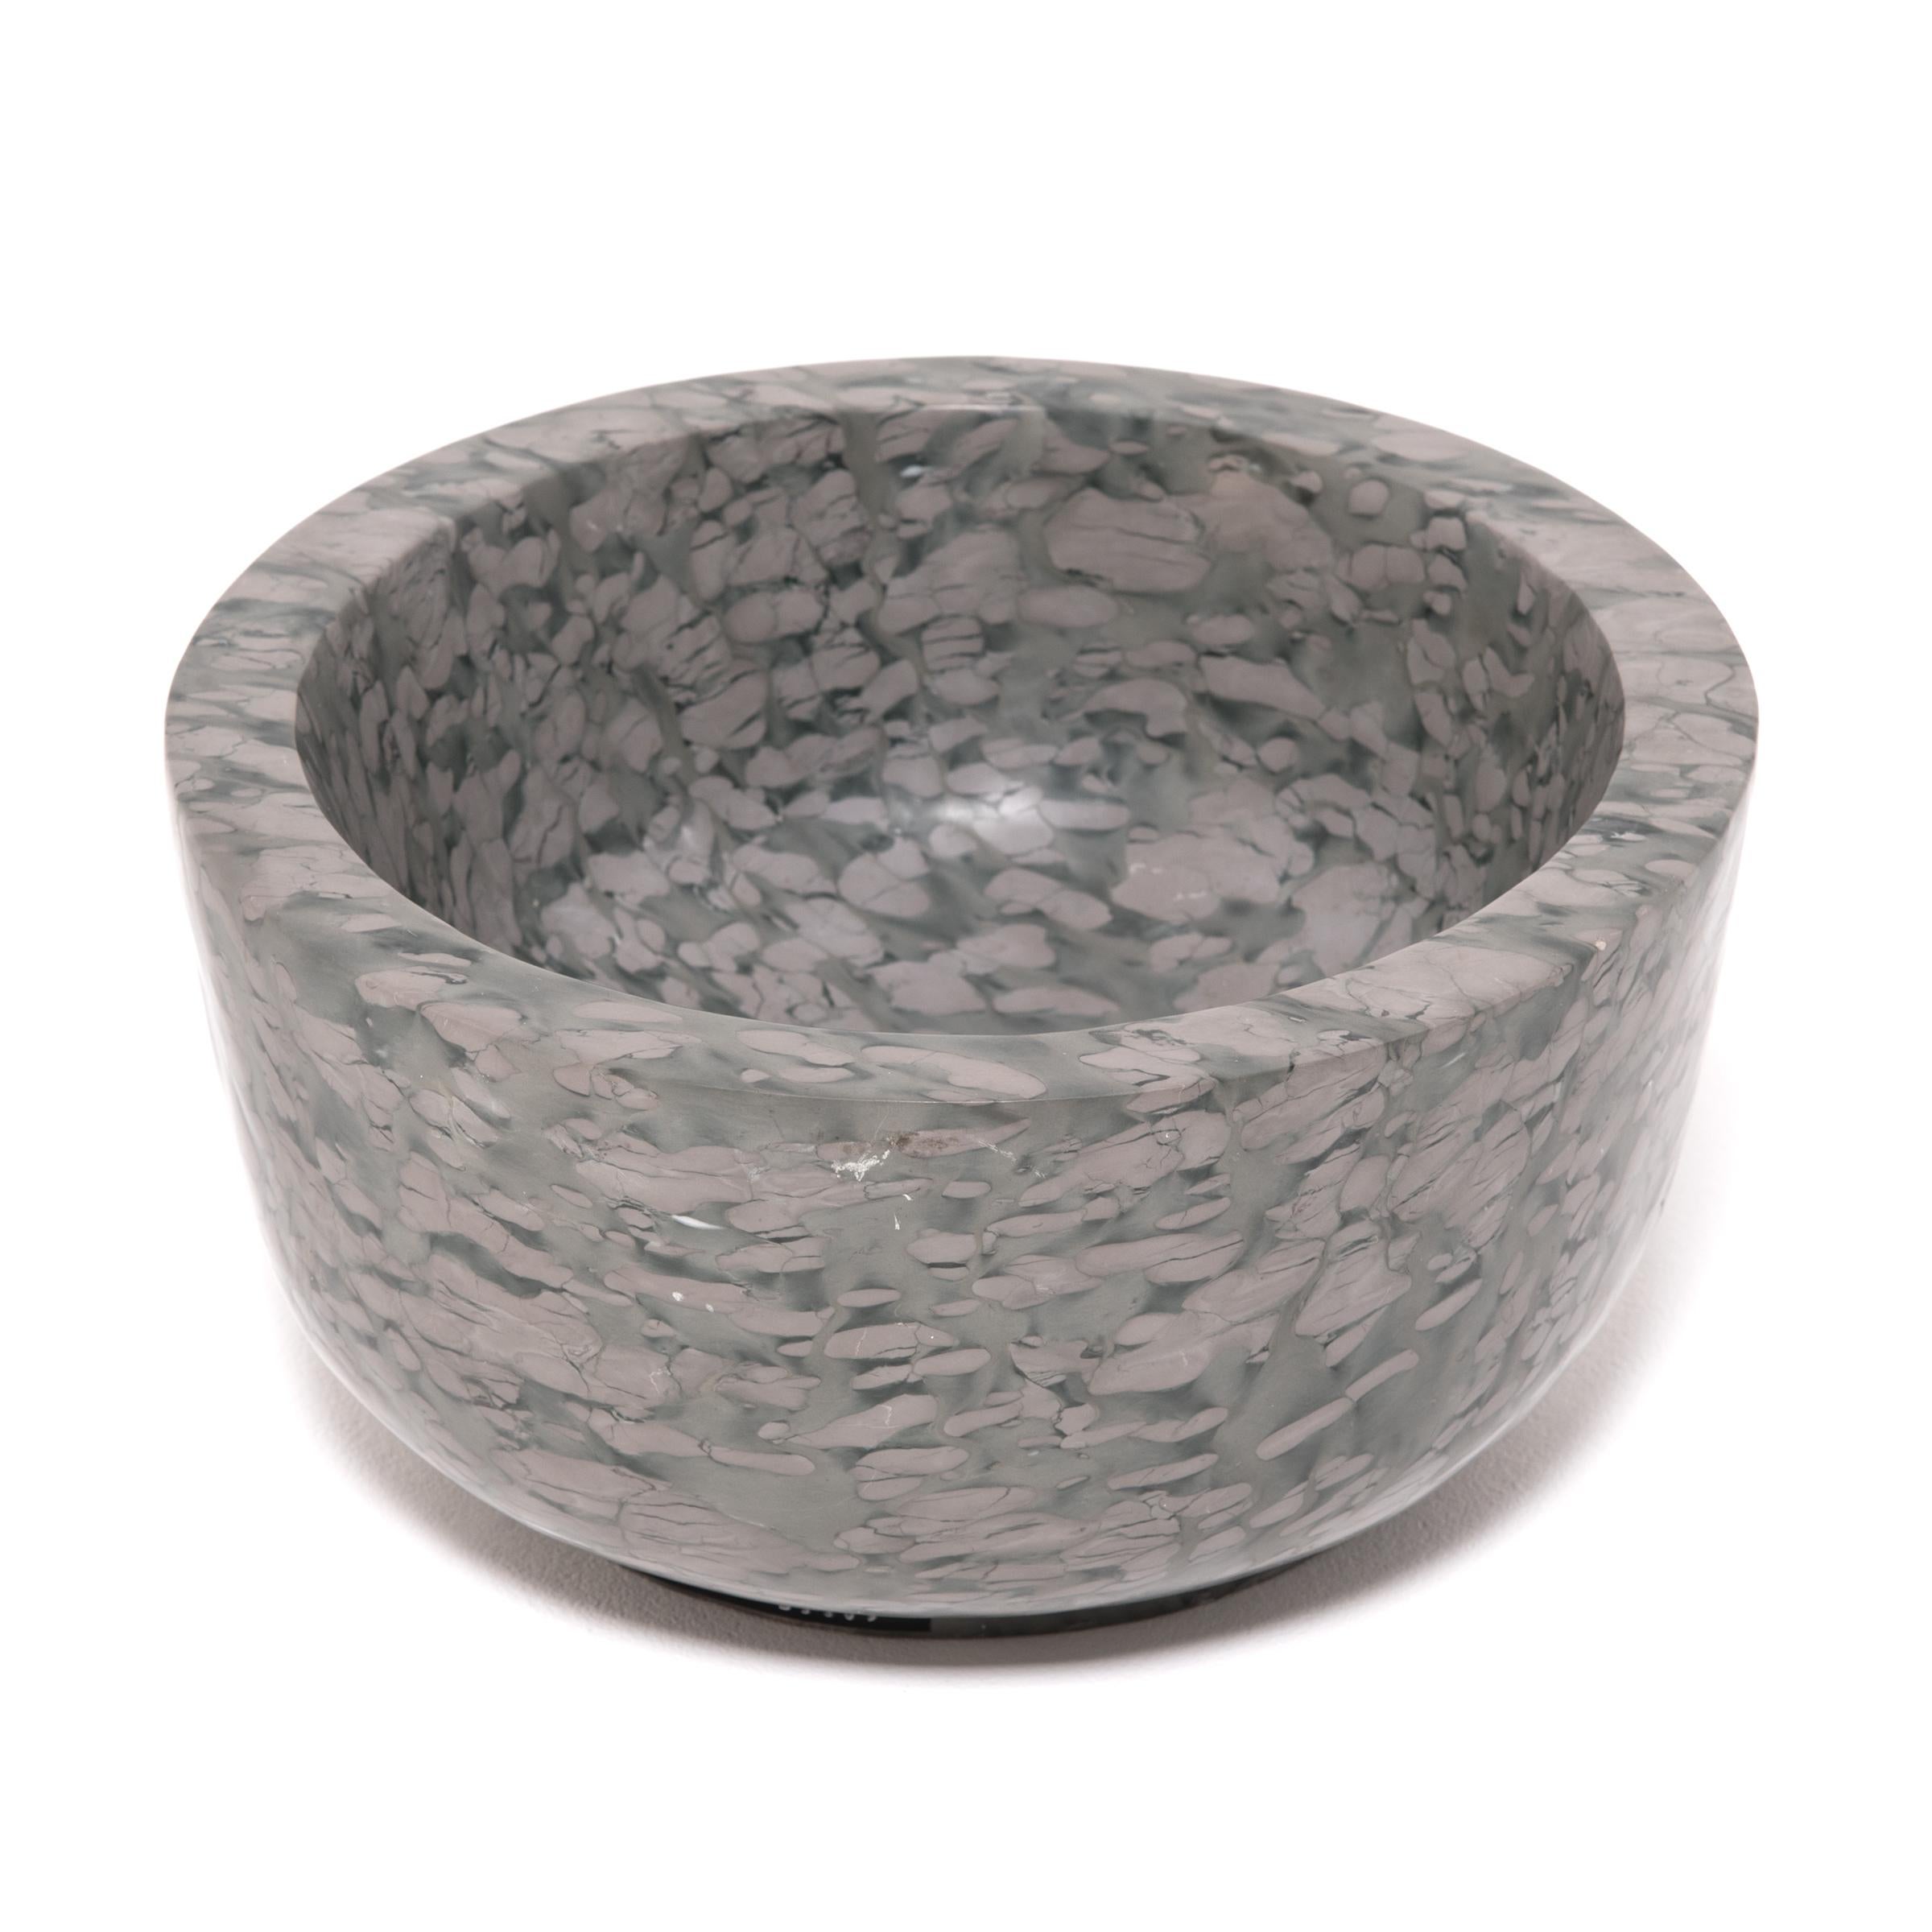 A clean-lined interpretation of an ancient form, this footed basin was hand-carved of zhenzhu stone by artisans in China's Shandong province. The mesmerizing pattern of zhenzhu is inherent to the stone, a conglomerate limestone extracted from Lake